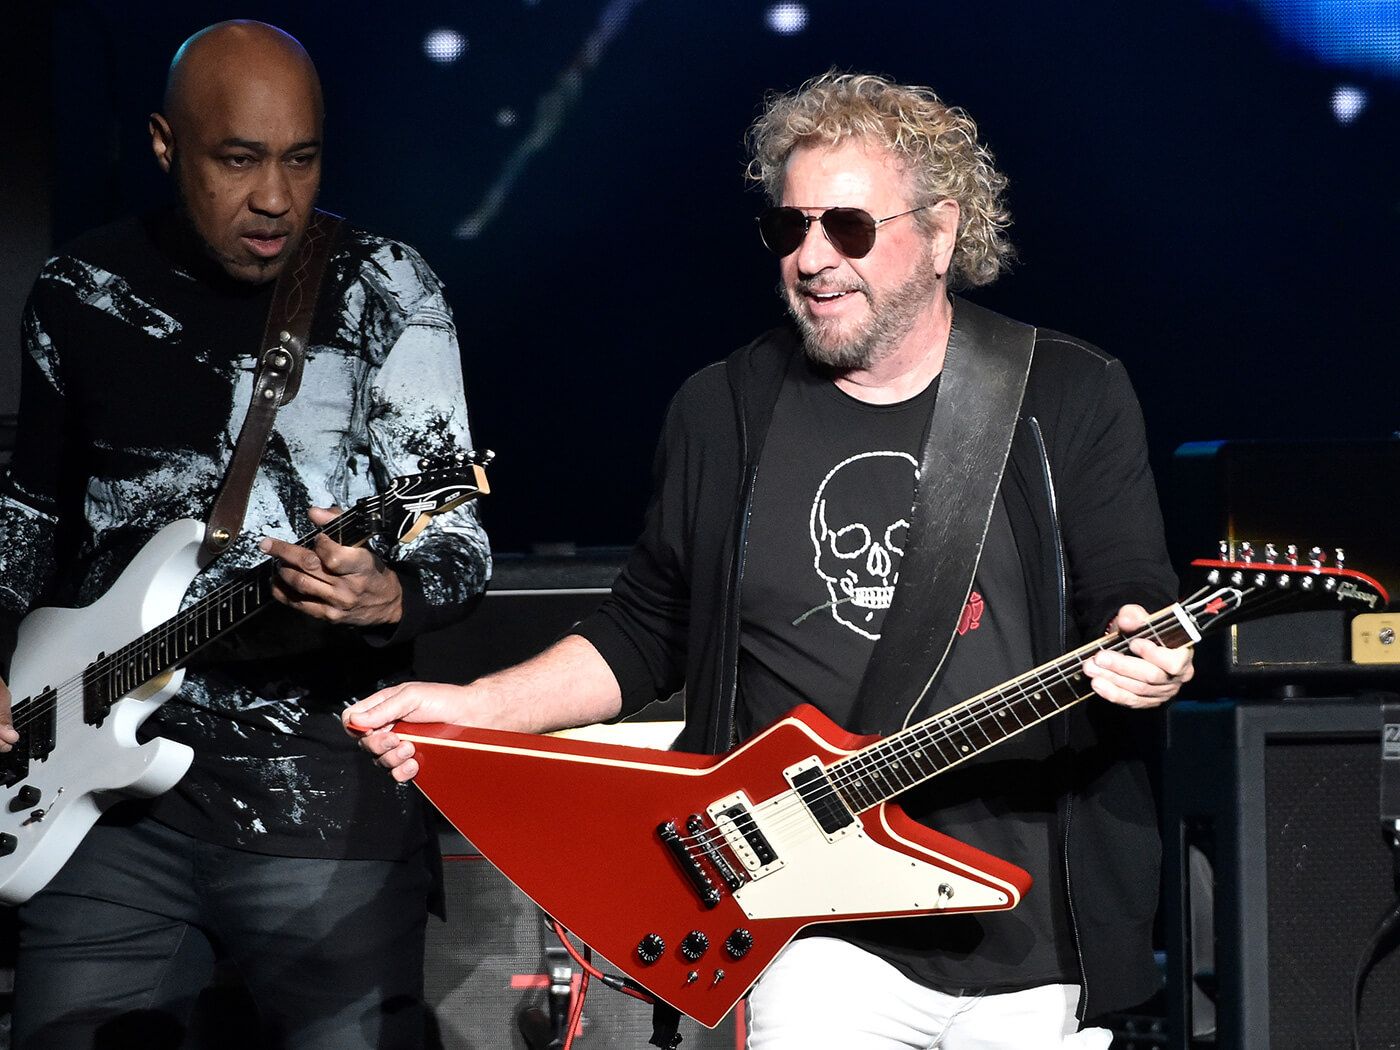 Ex Van Halen Frontman Sammy Hagar On Starting To Gig Again: “I'm Sorry To Say It, But We All Gotta Die”. Guitar.com. All Things Guitar